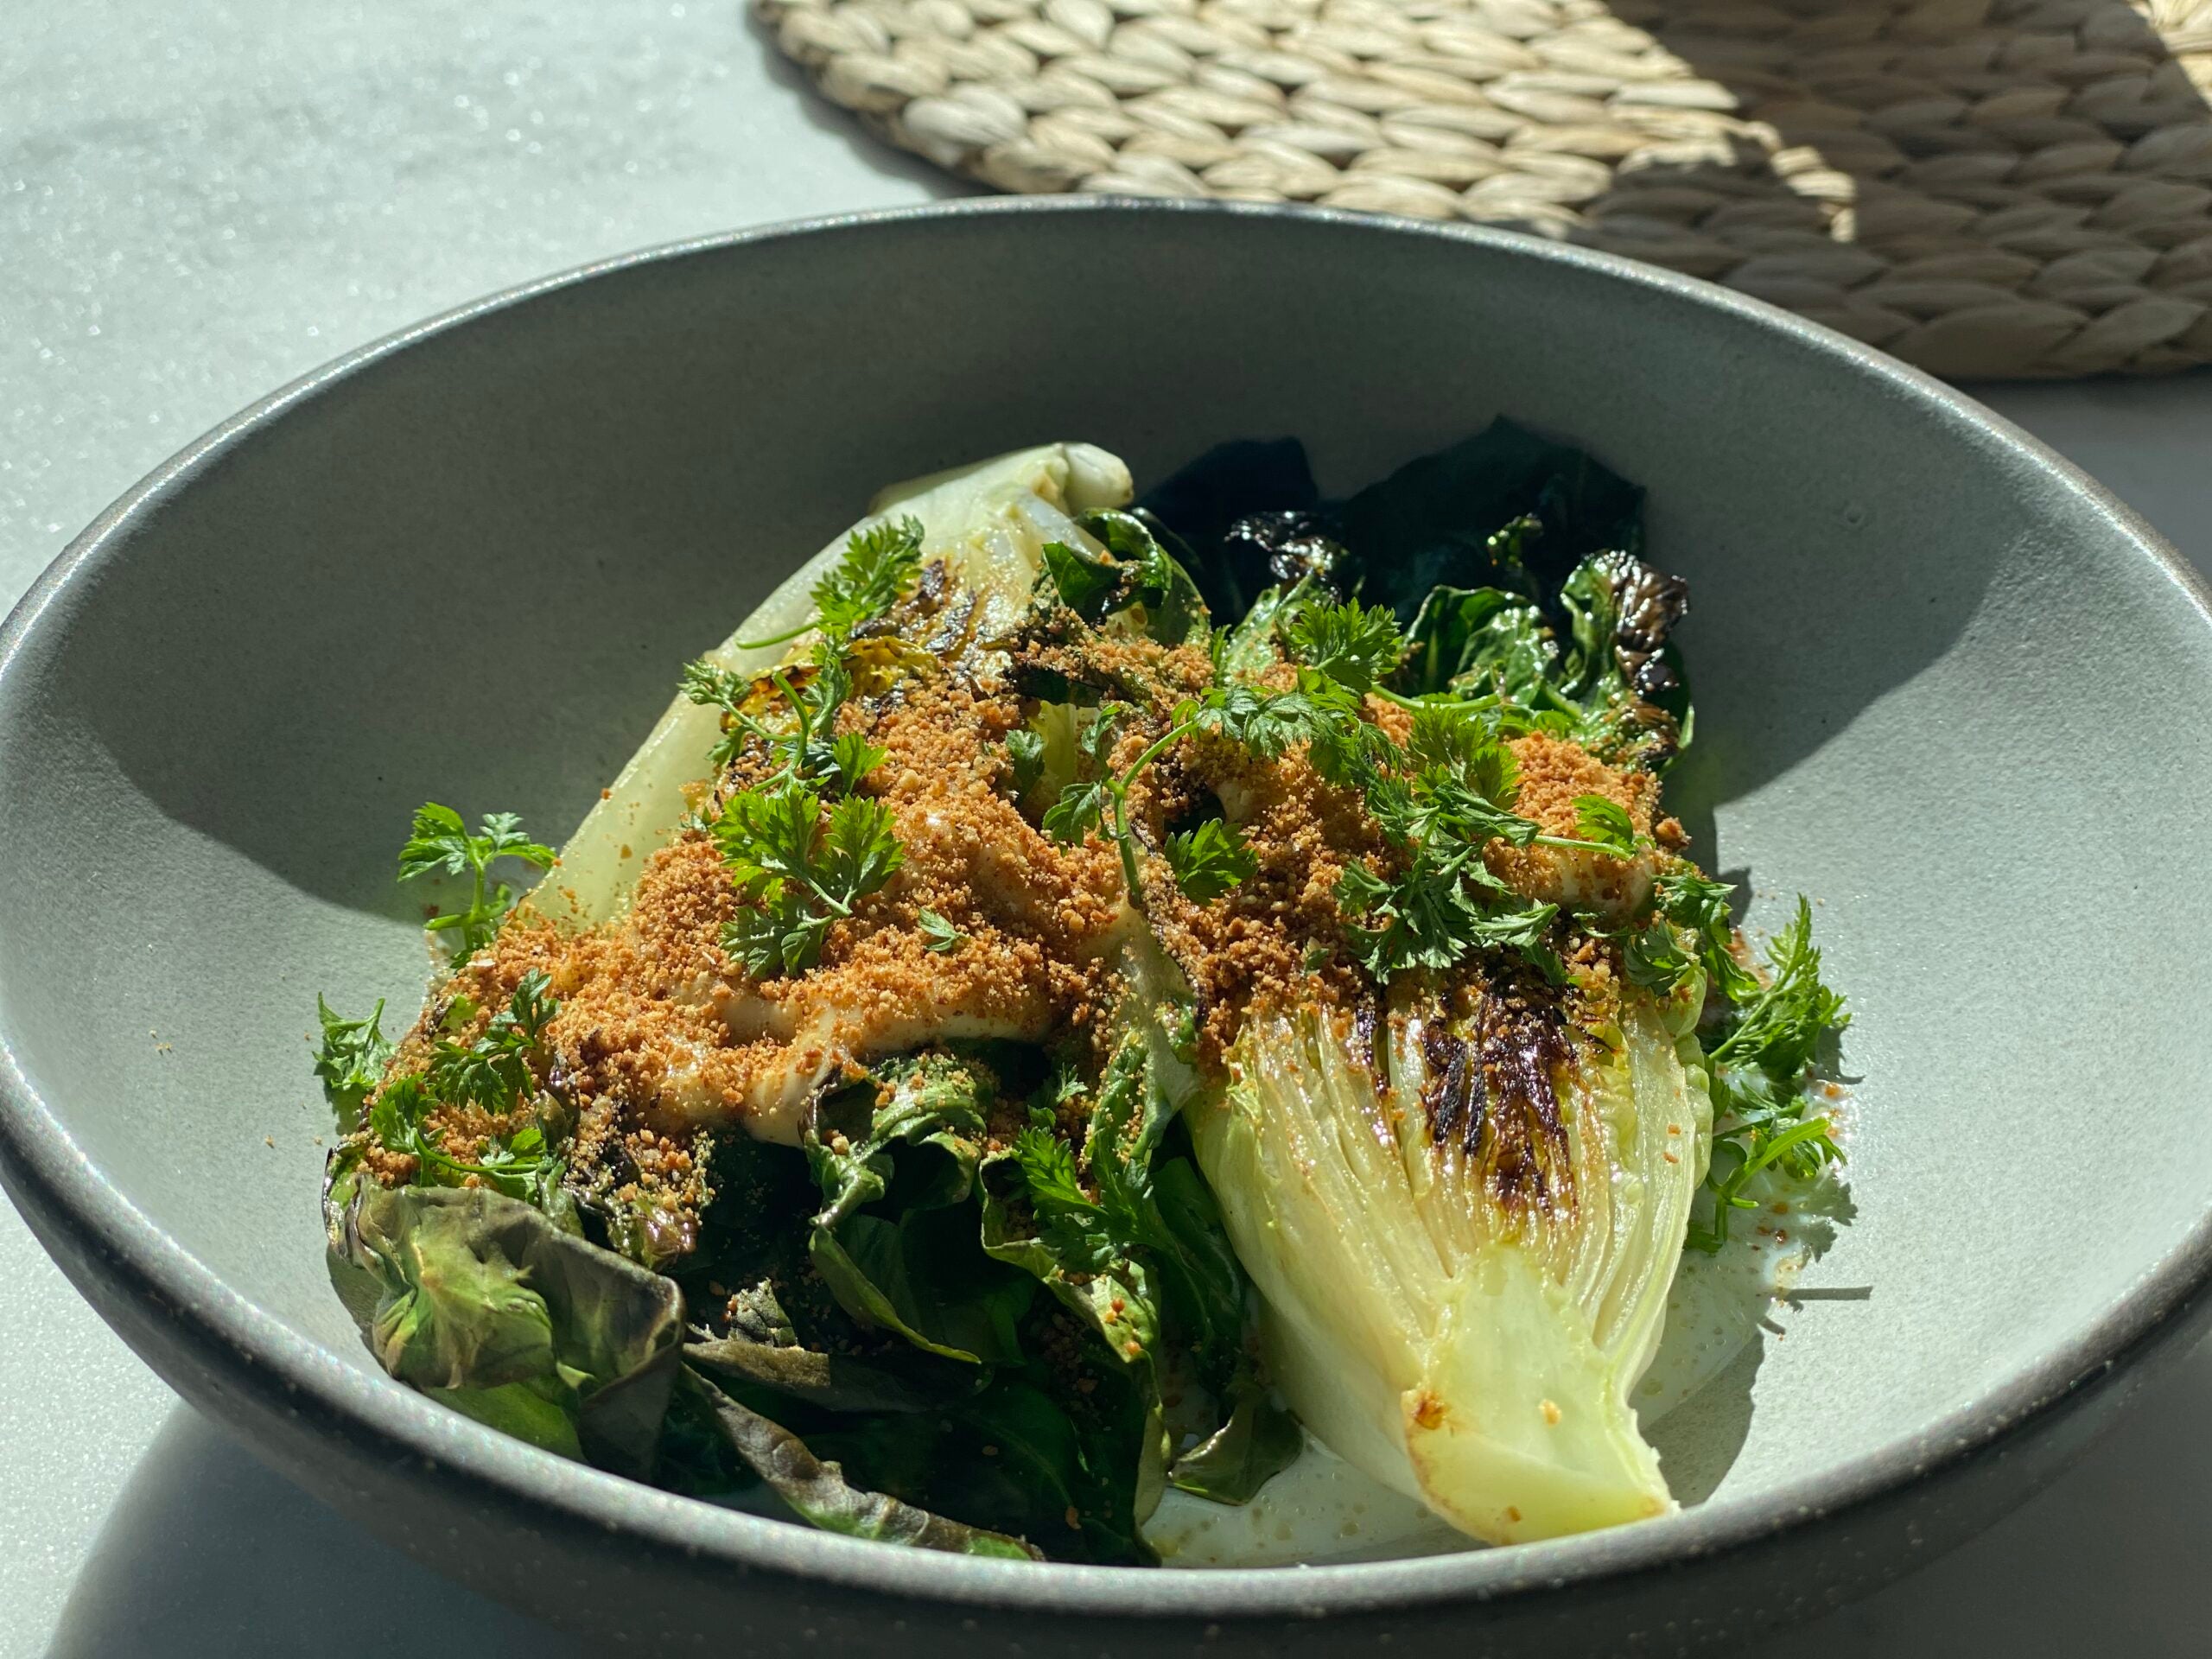 Seared Little Gem Lettuce with Buttermilk, Anchovy, and Bread Crumbs